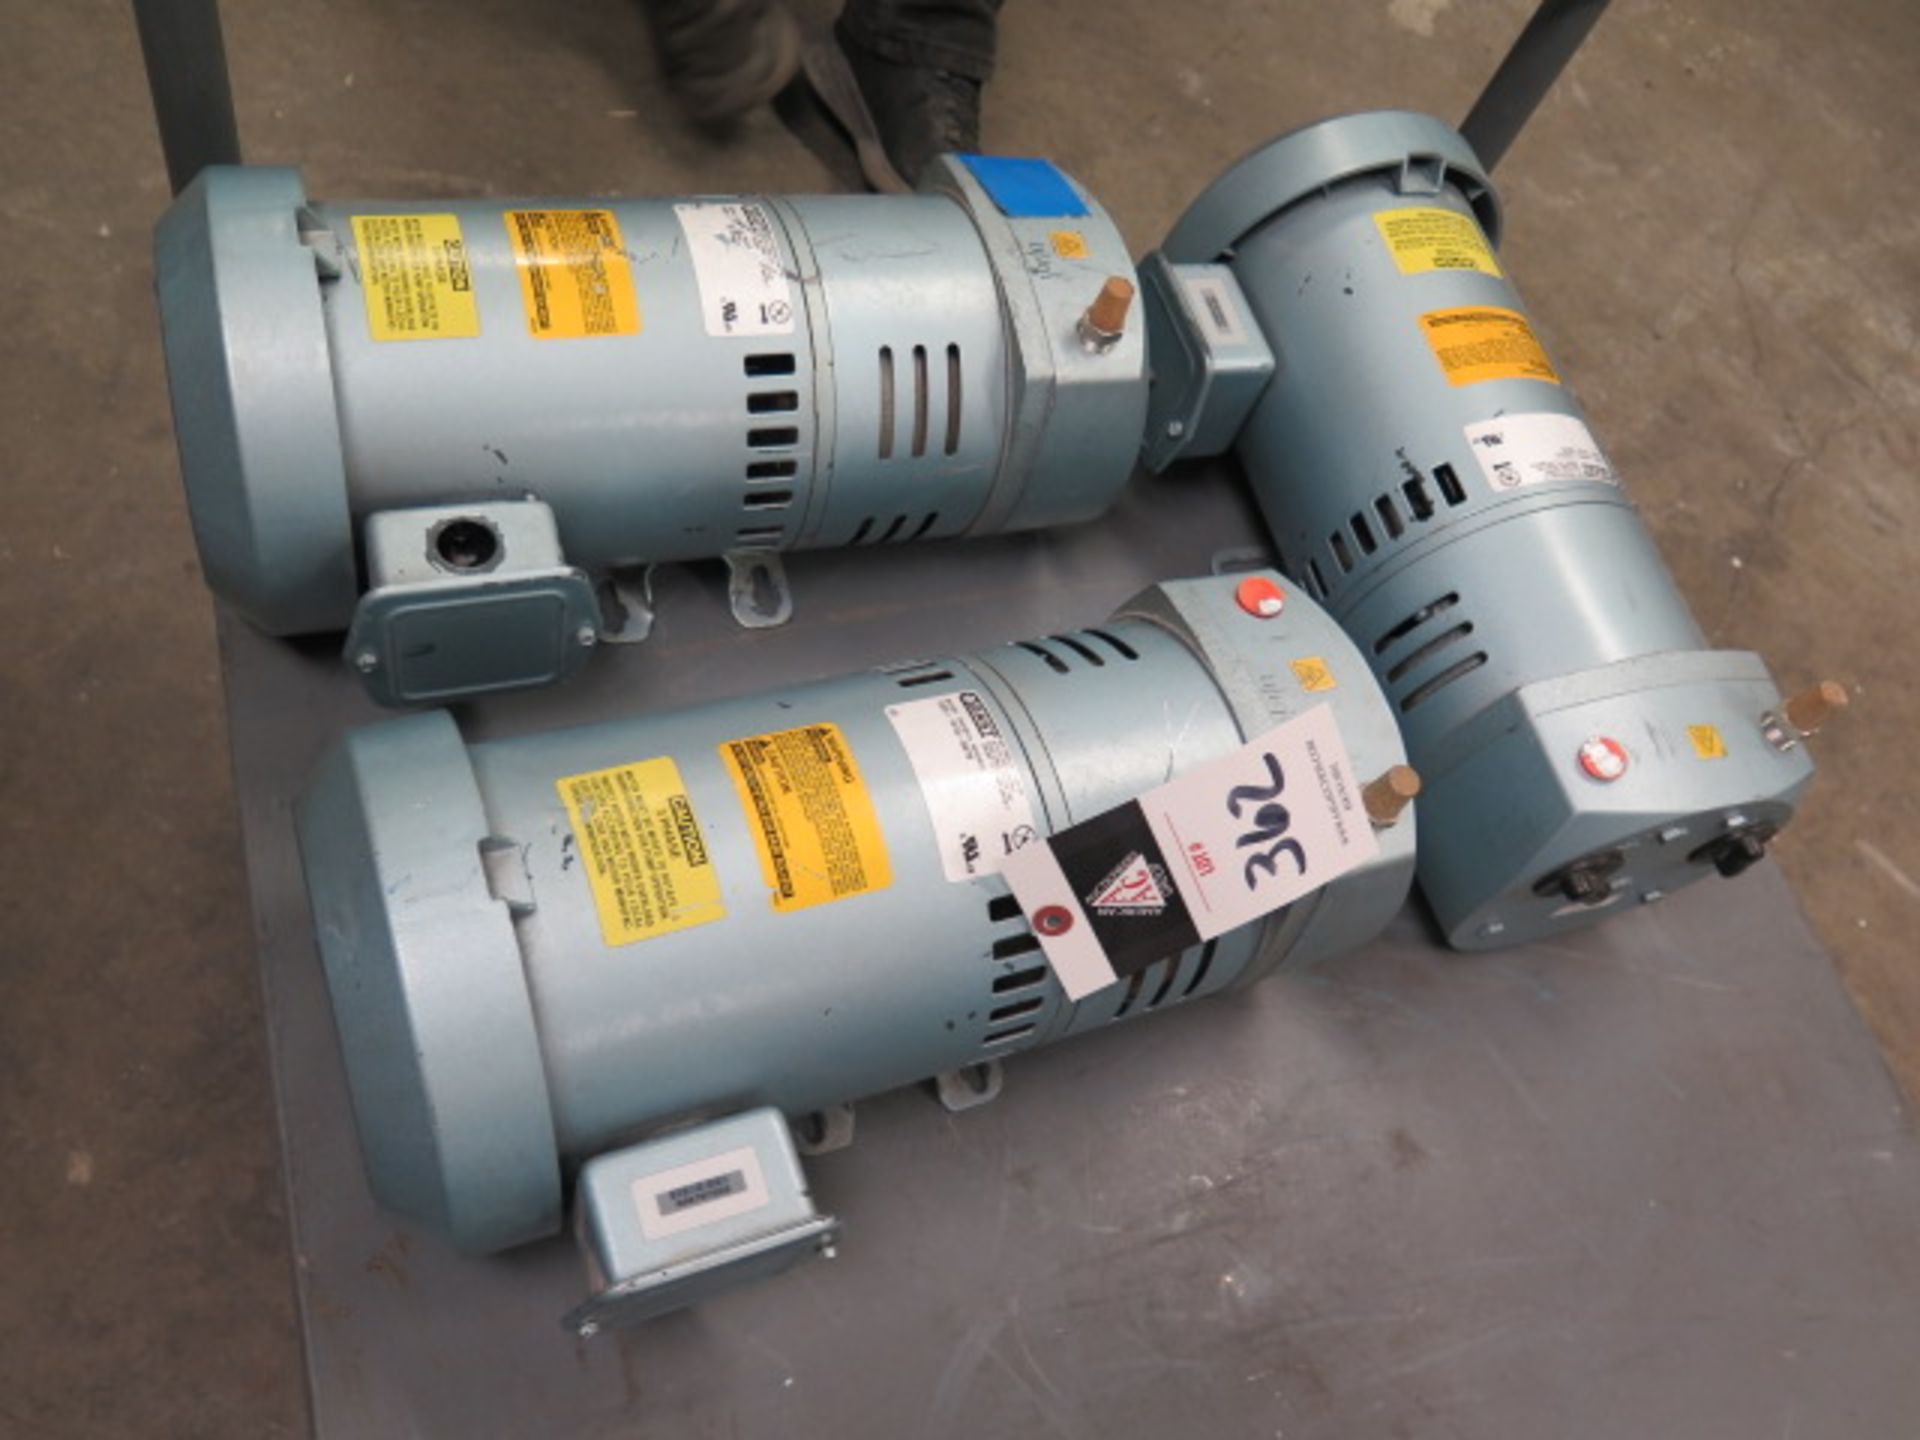 Gast mdl. 1023-101Q-G279 Vacuum Pumps (3) 3/4Hp 208-230/380-460V (SOLD AS-IS - NO WARRANTY)